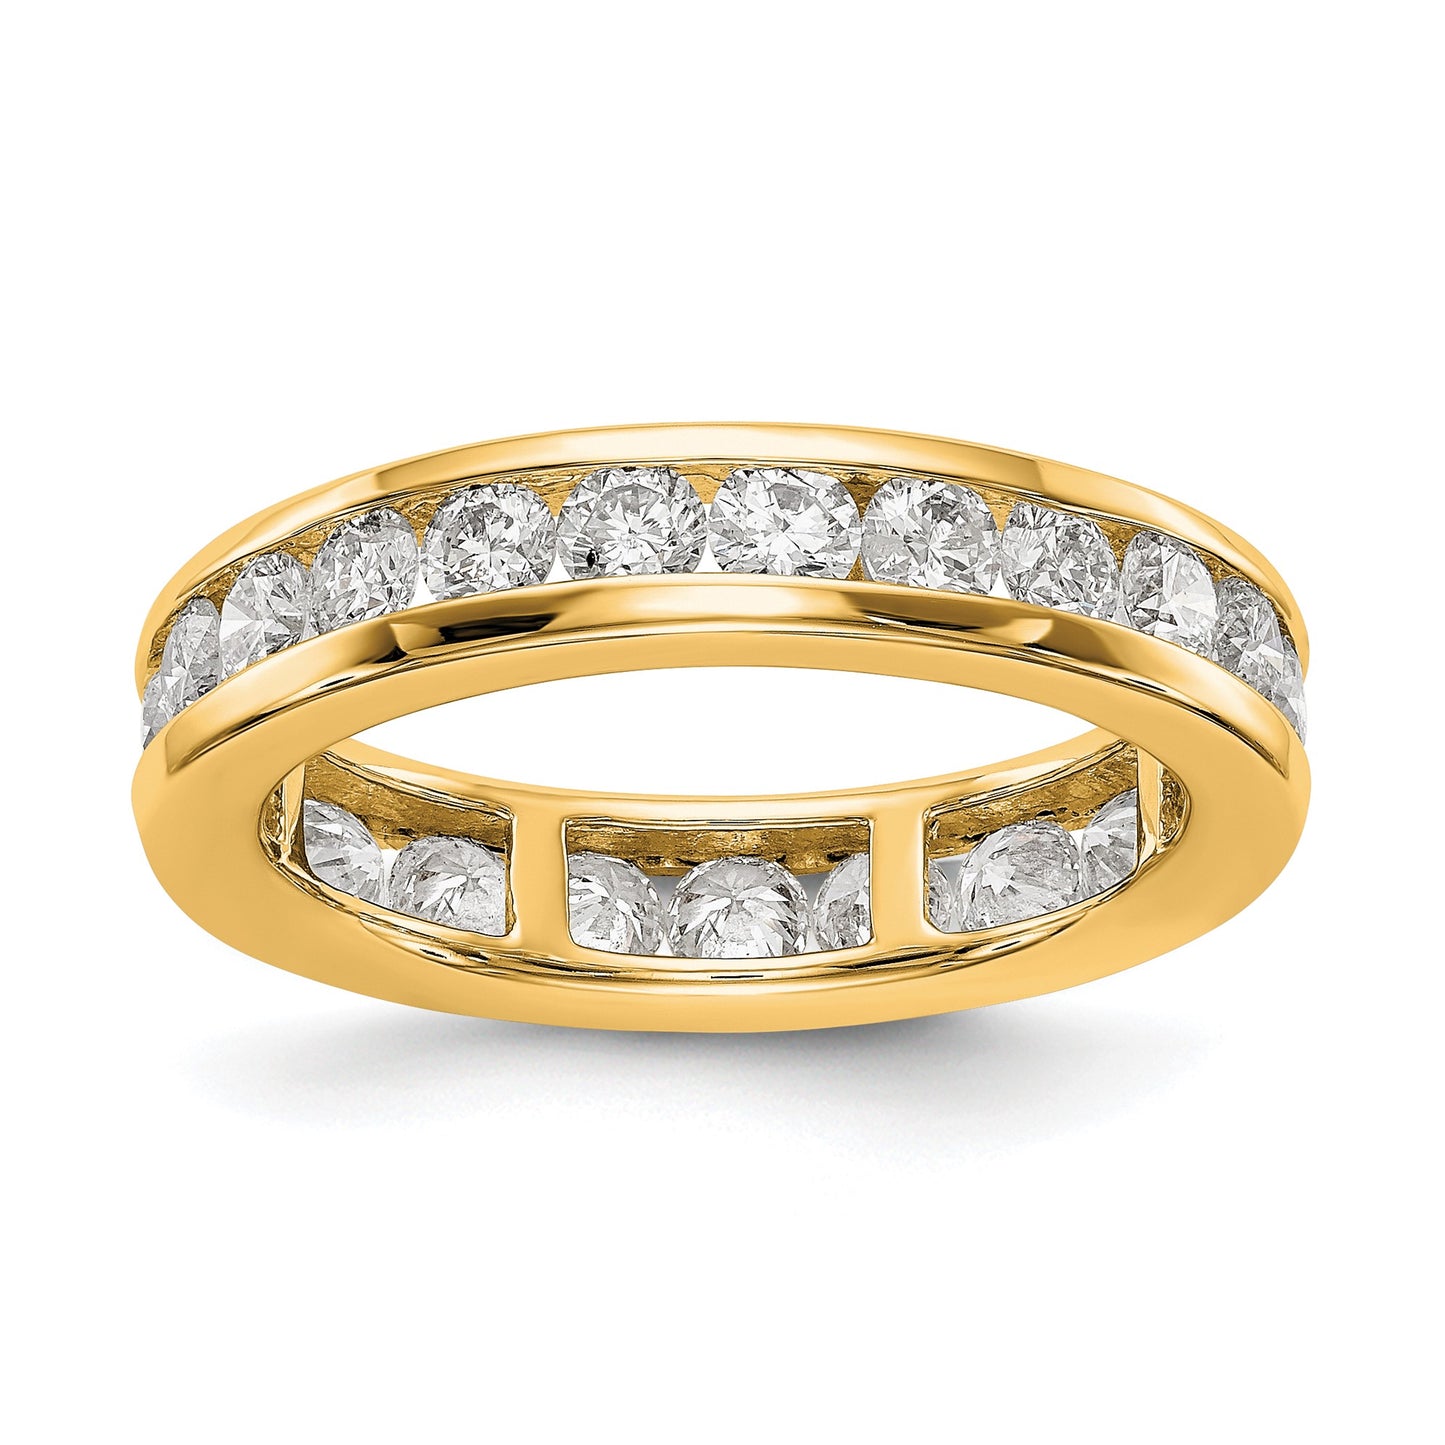 2 Ct. Natural Diamond Womens Eternity Wedding Band Ring in 14k Yellow Gold